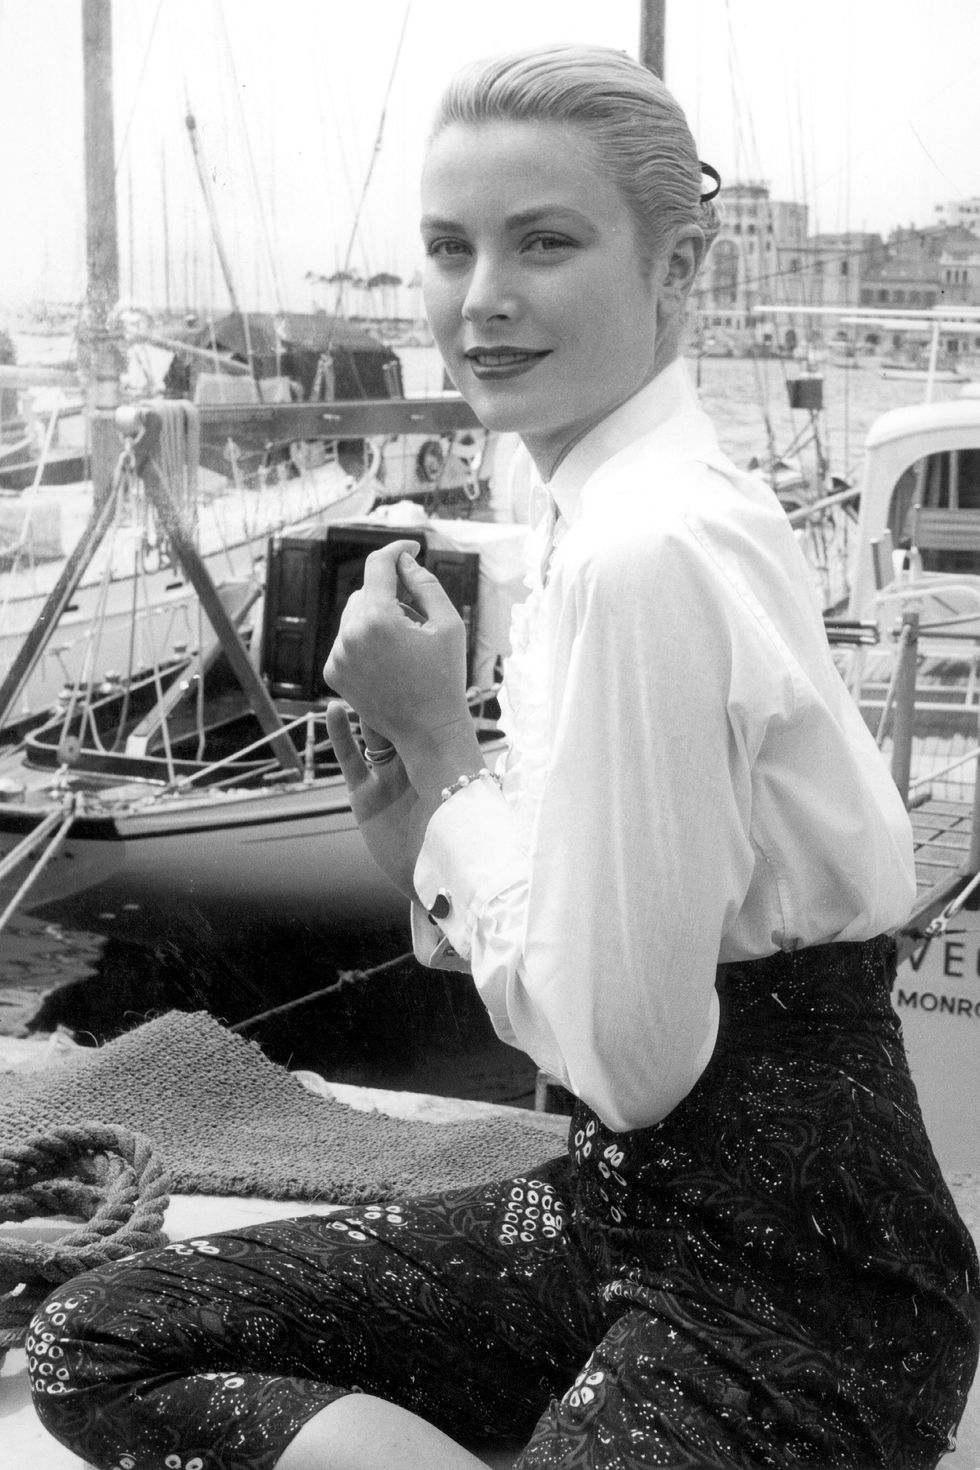 American actress Grace Kelly during the Cannes Film Festival, 6th May 1955. (Photo by RDA/Hulton Archive/Getty Images)